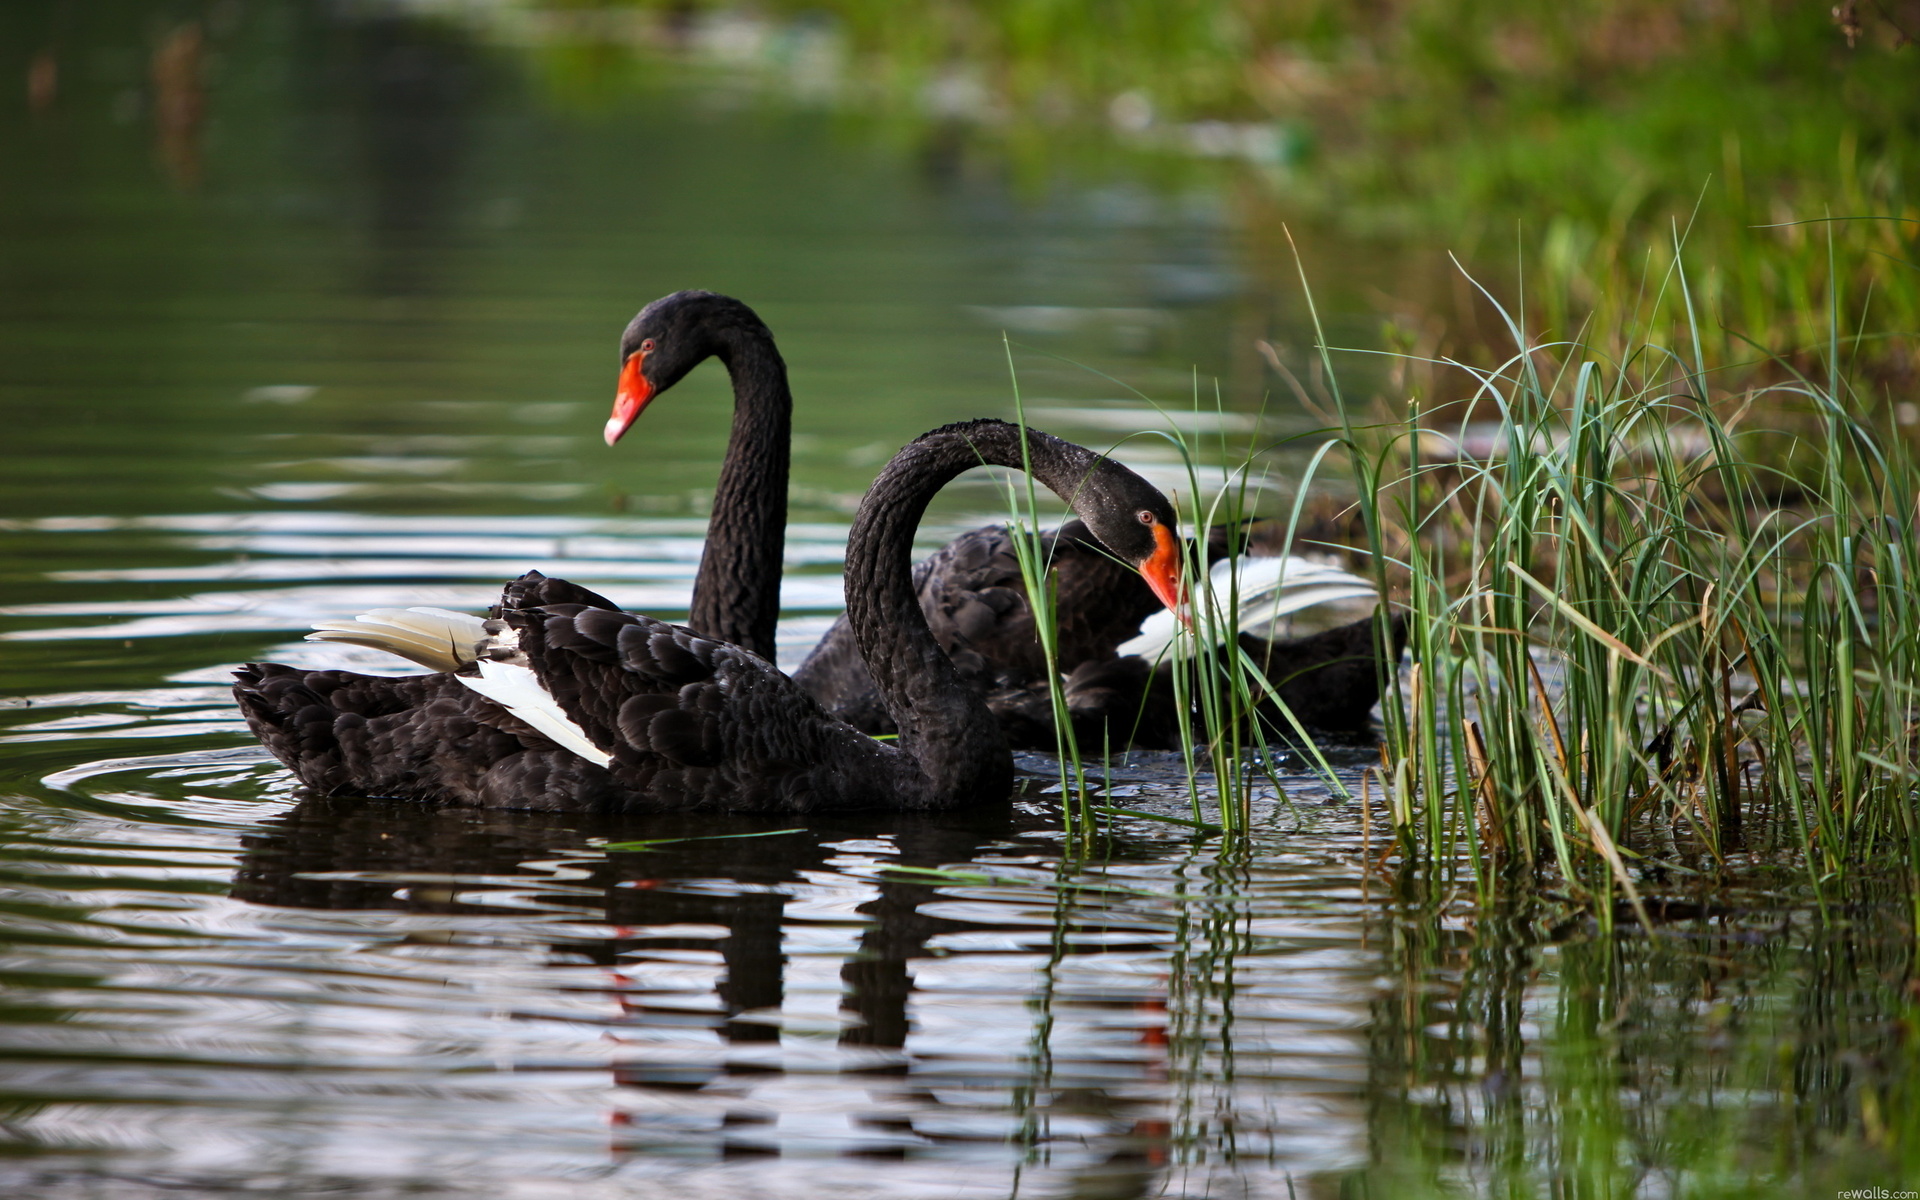 swans, Animals, Birds, Feathers, Contrast, Lakes, Pond, Water, Swim, Float, Grass, Shore, Wildlife, Reflection, Reeds Wallpaper